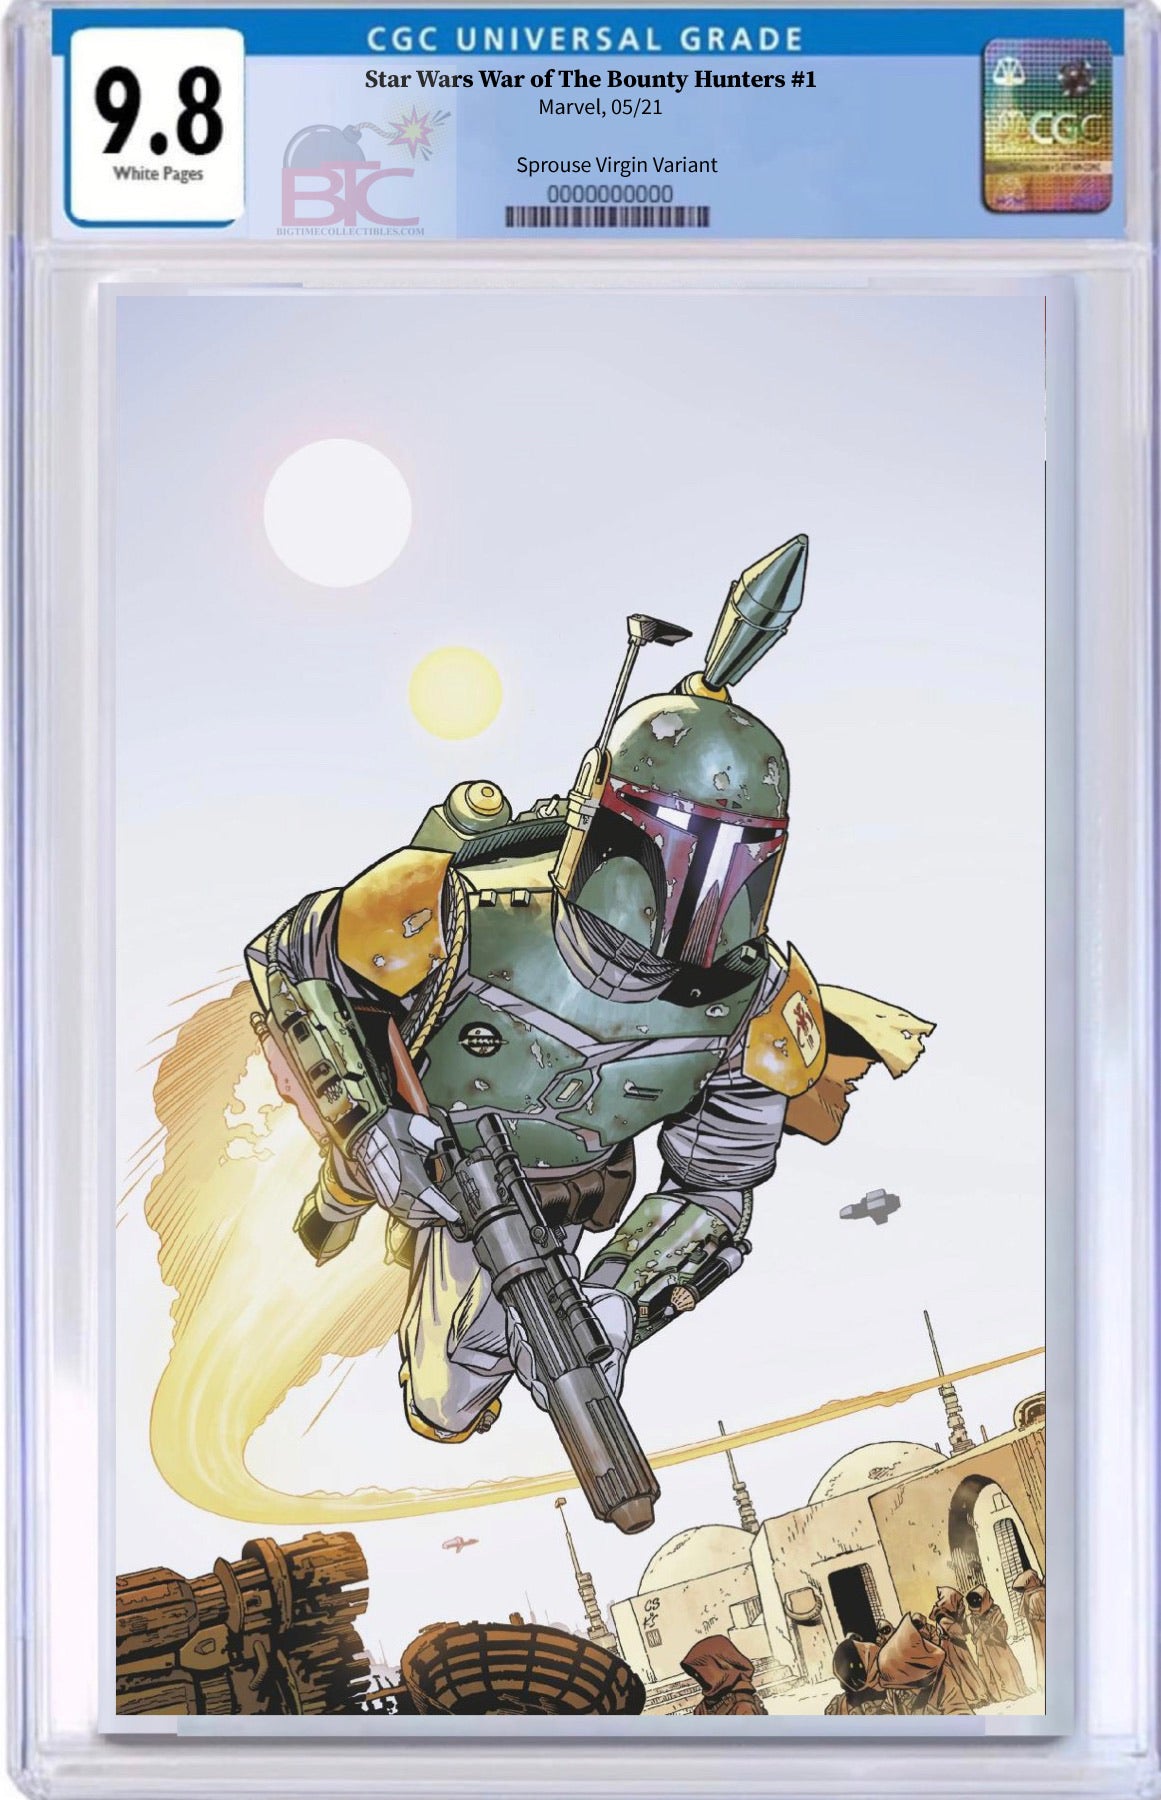 STAR WARS WAR BOUNTY HUNTERS ALPHA #1 CHRIS SPROUSE EXCLUSIVE 05/05/21